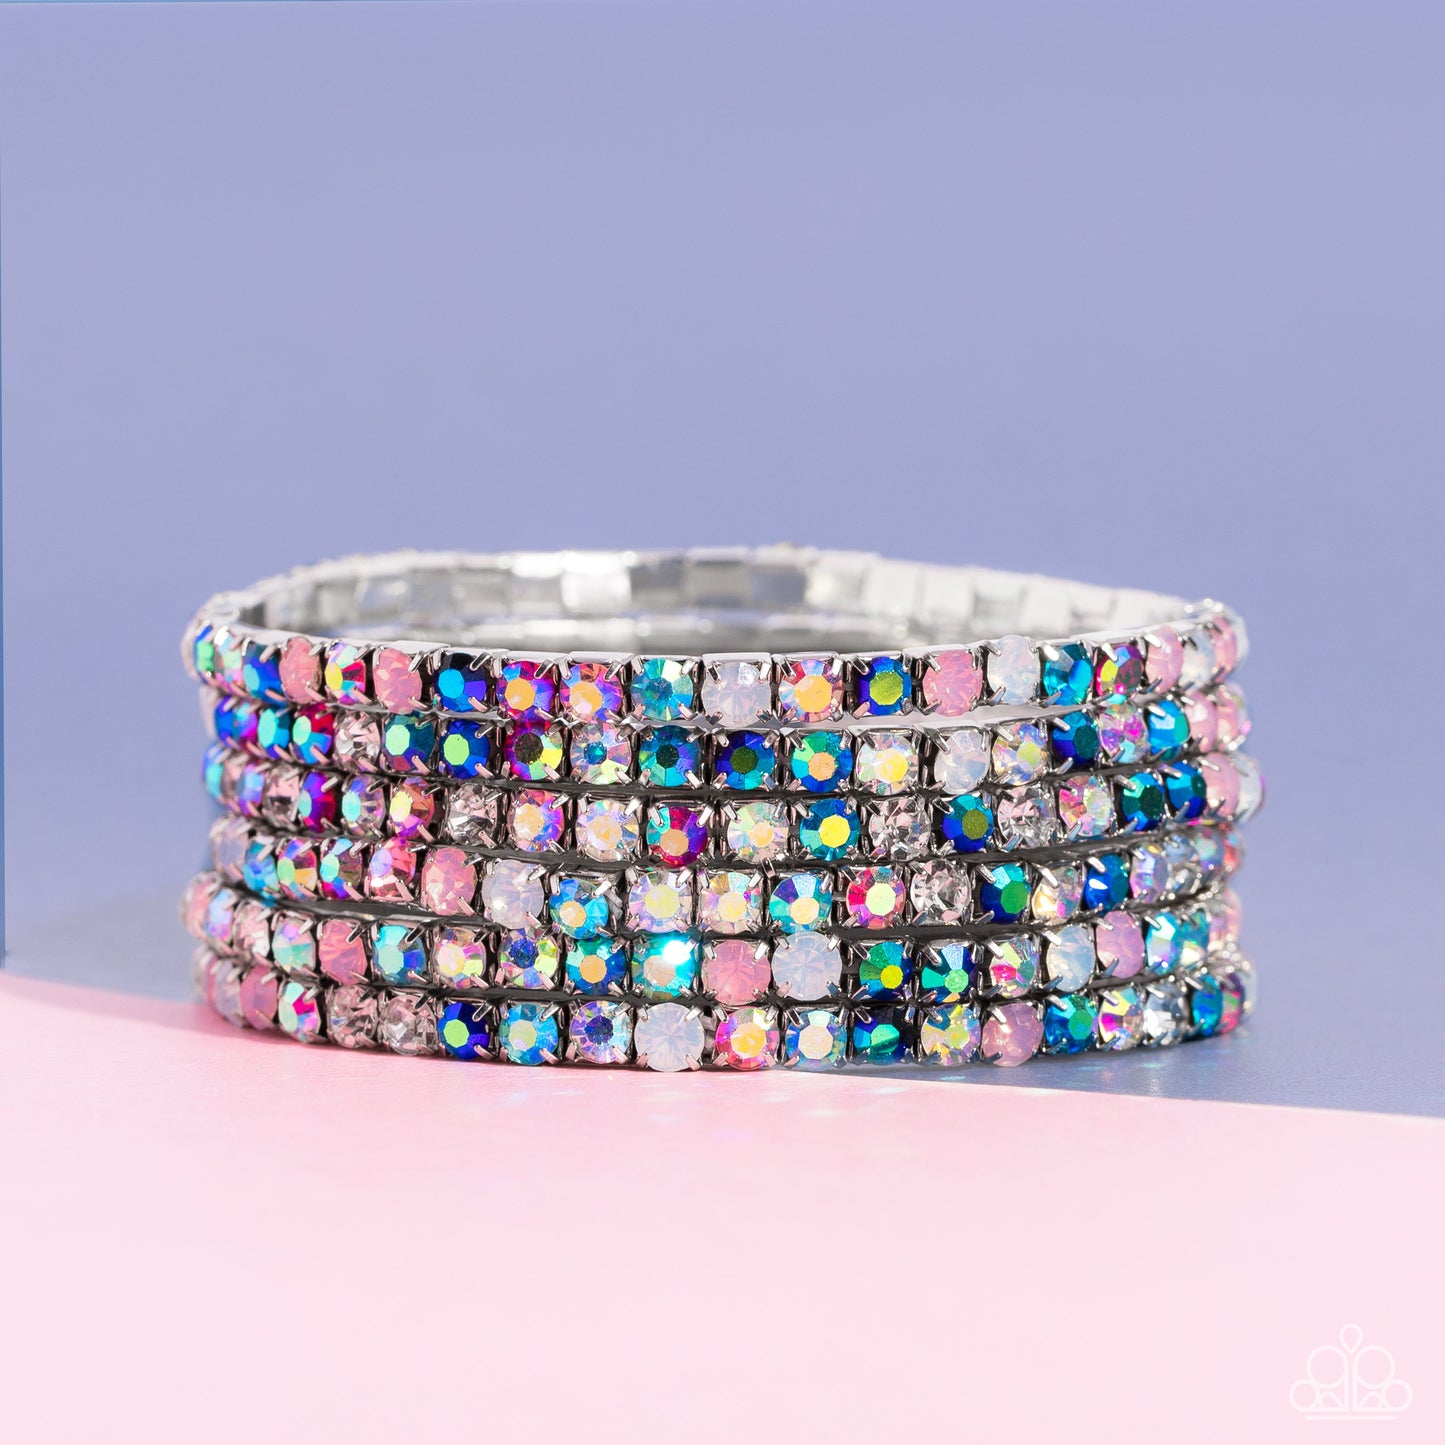 Rock Candy Rage - Multi Color Bracelet - Paparazzi Accessories - Embellished in rhinestone studs, six bracelets threaded along elastic stretchy bands stack across the wrist. Opalescent white, clear, and shades of iridescent in fuchsia, baby pink, and blues create a dramatic collision of color and shimmer. Due to its prismatic palette, color may vary. Sold as set of six bracelets.